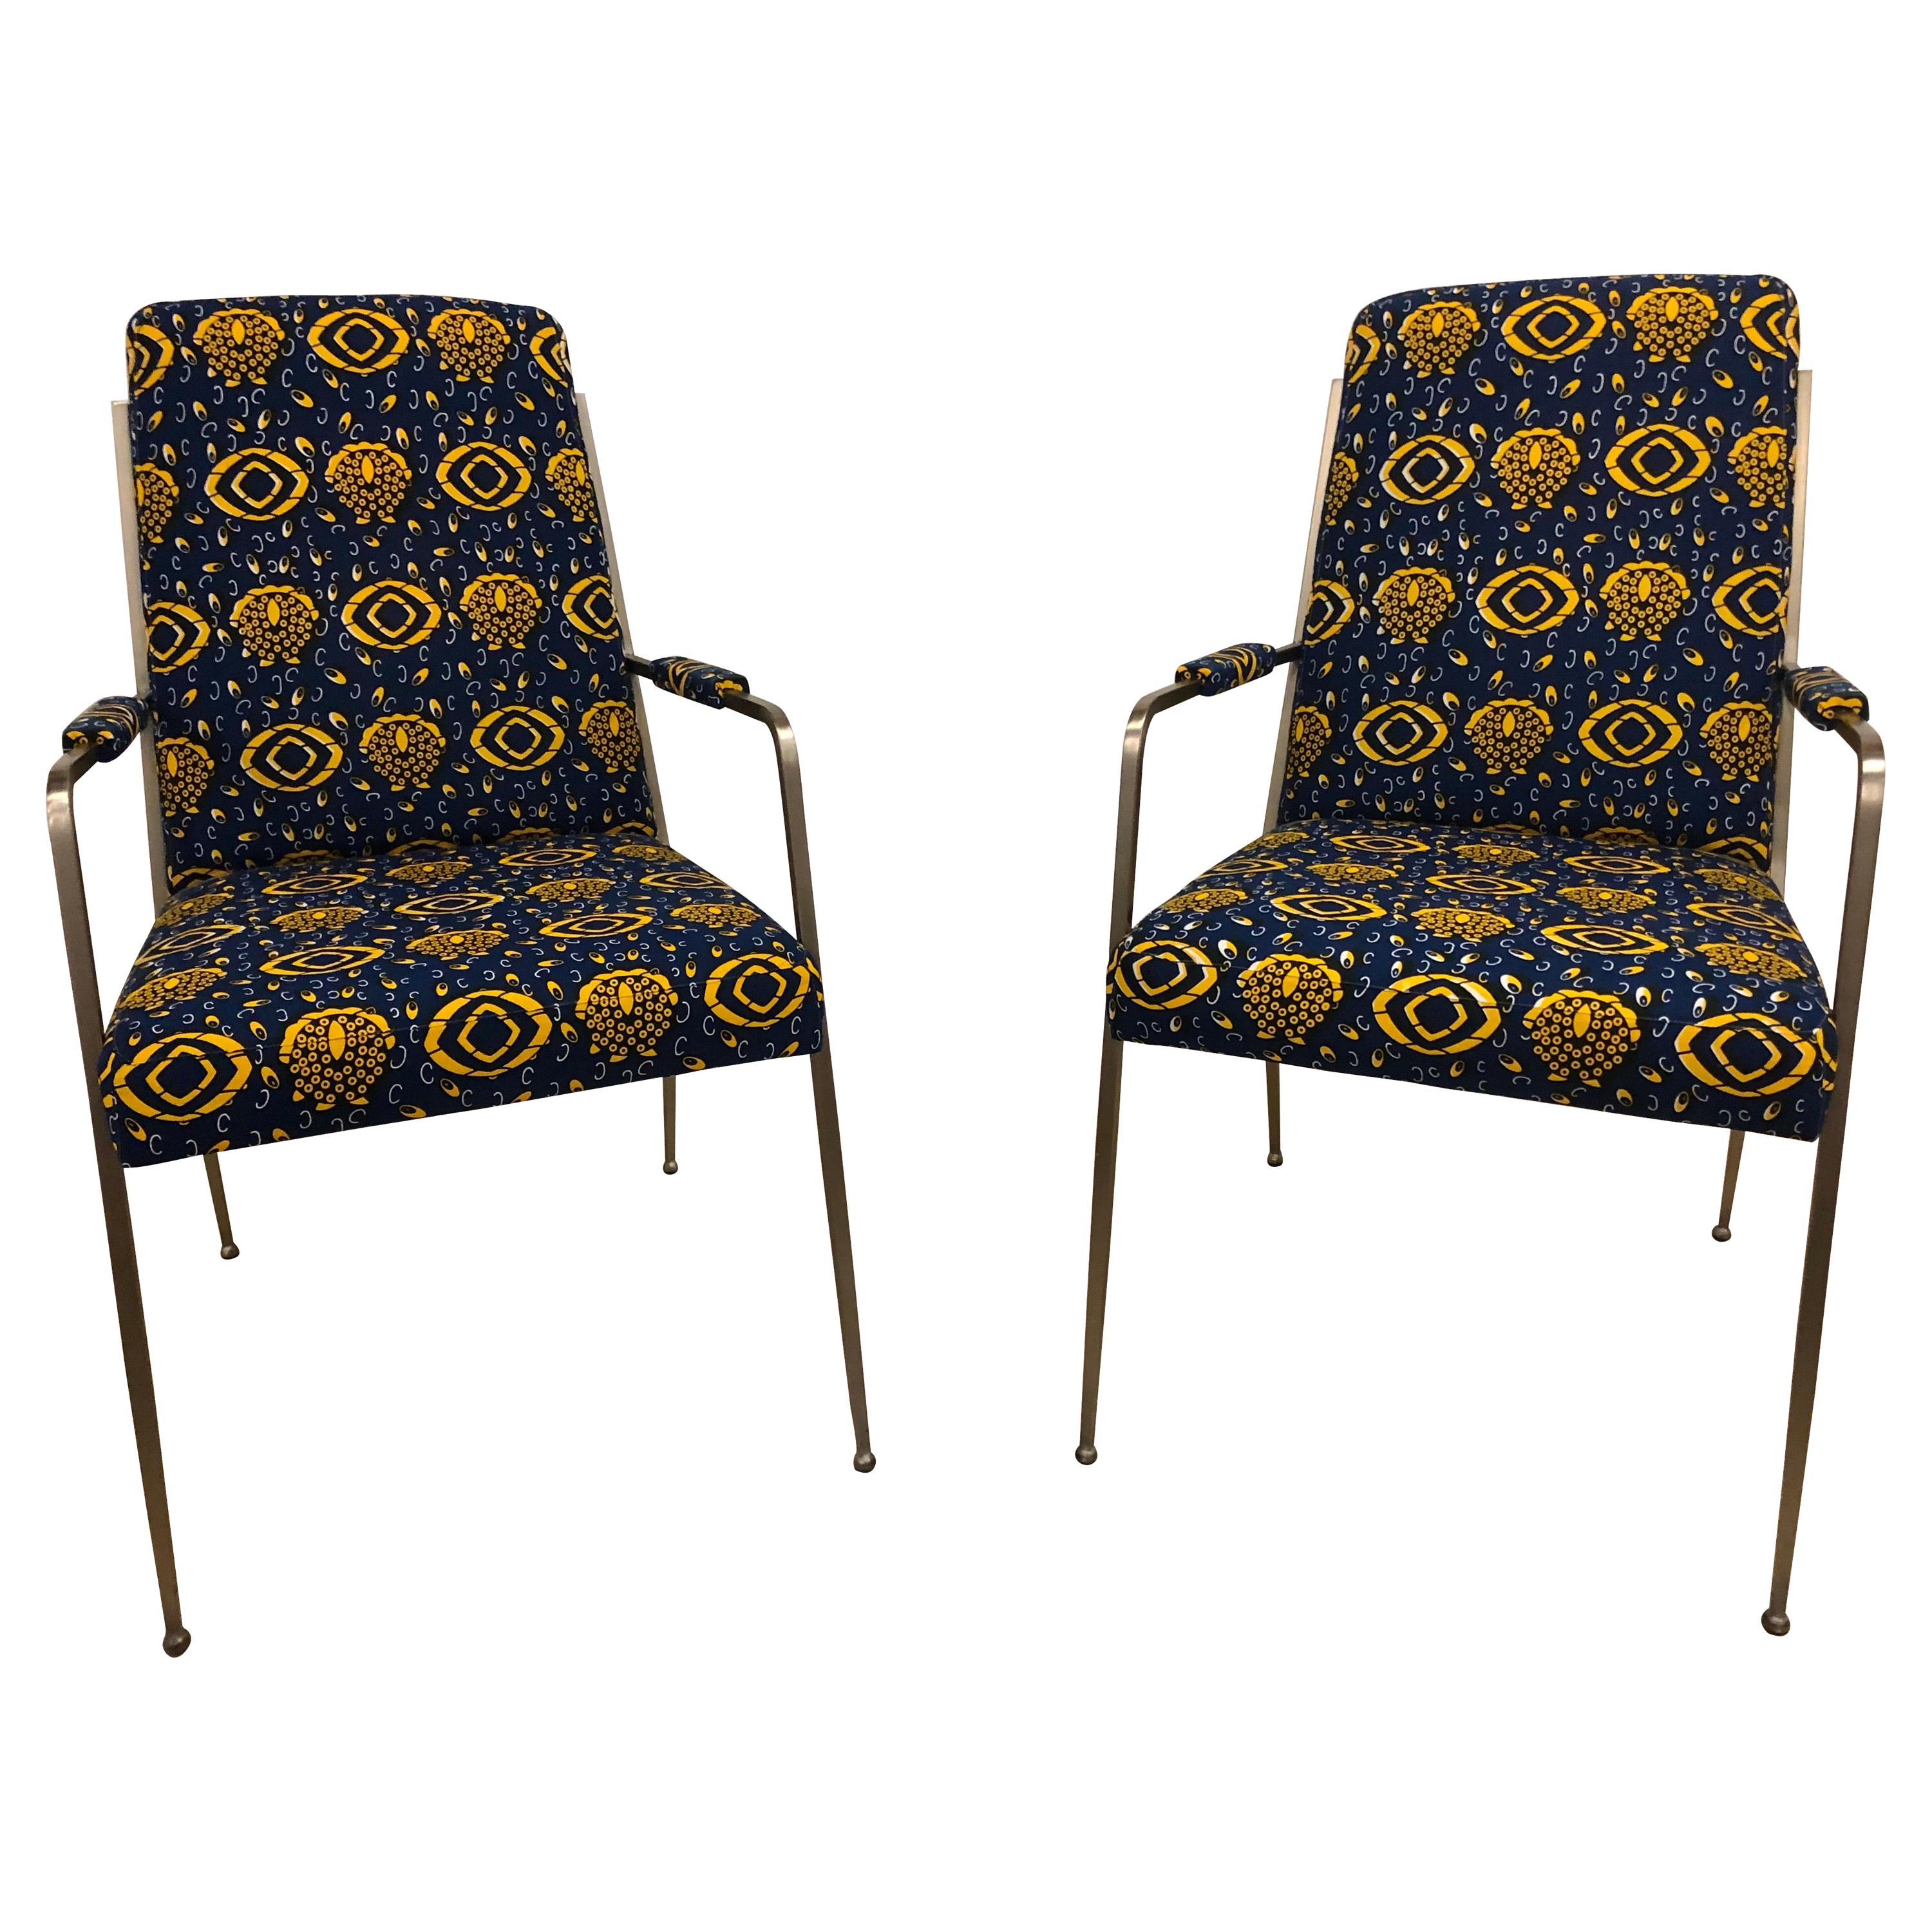 Pair of Iron Eye Armchairs by Jean Louis Deniot for Baker